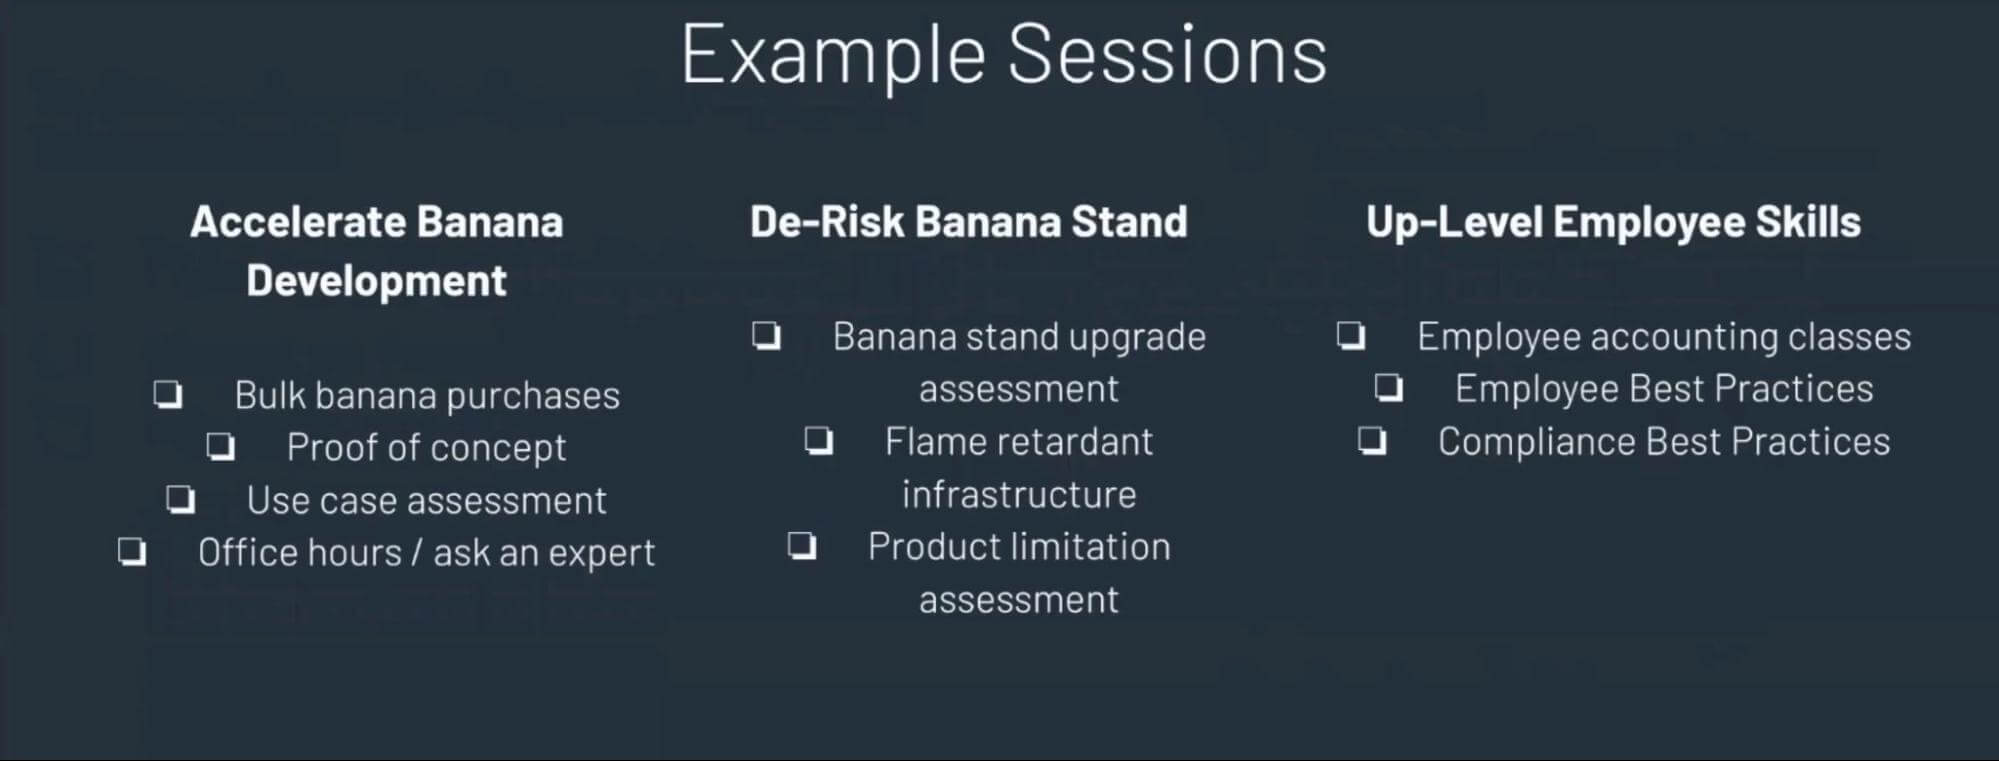 Example sessions: accelerate banana development, de-risk banana stand, up-level employee skills